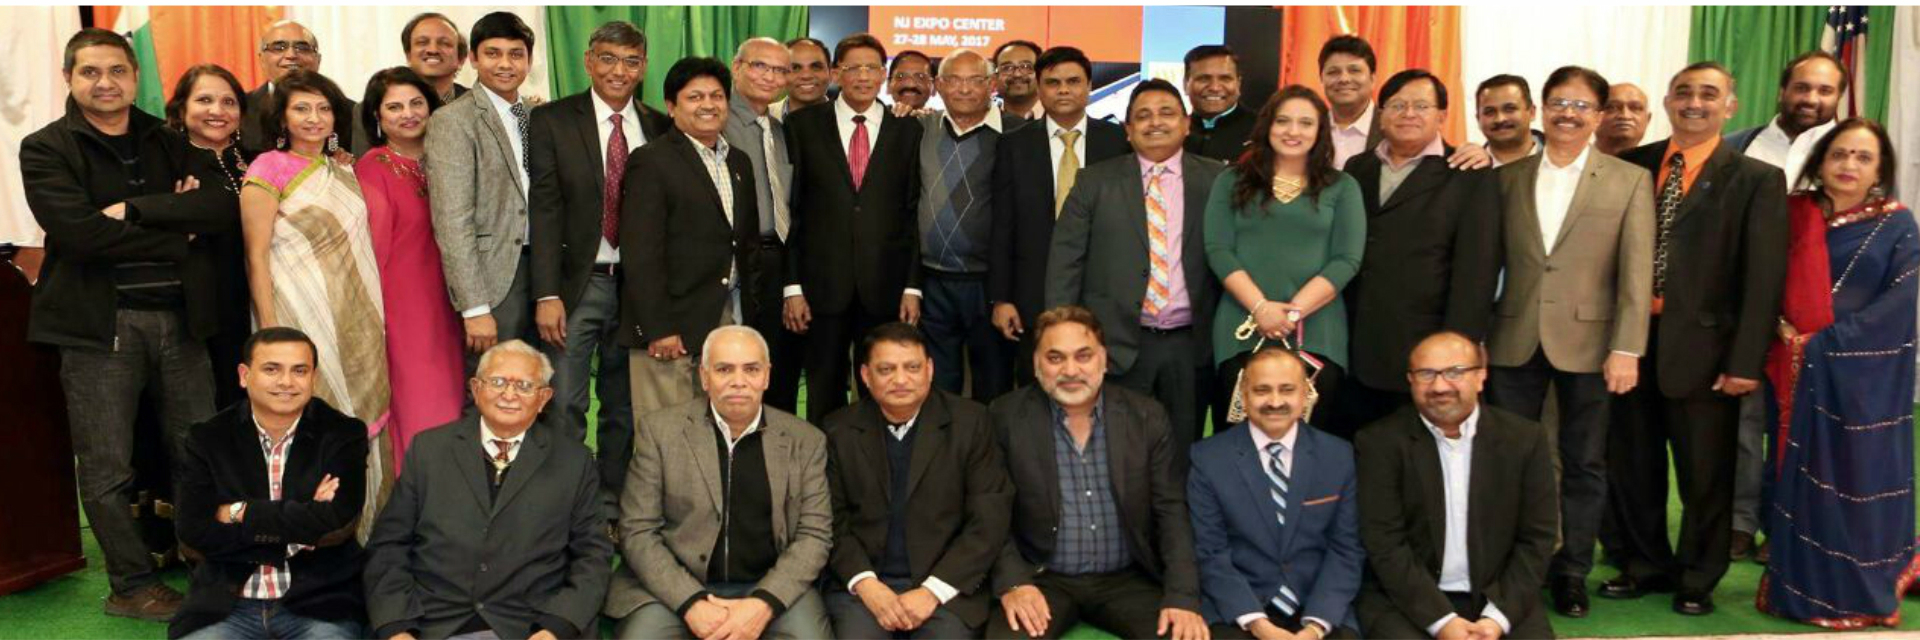 Glorious India Organized a Pre-event Get-together in the US